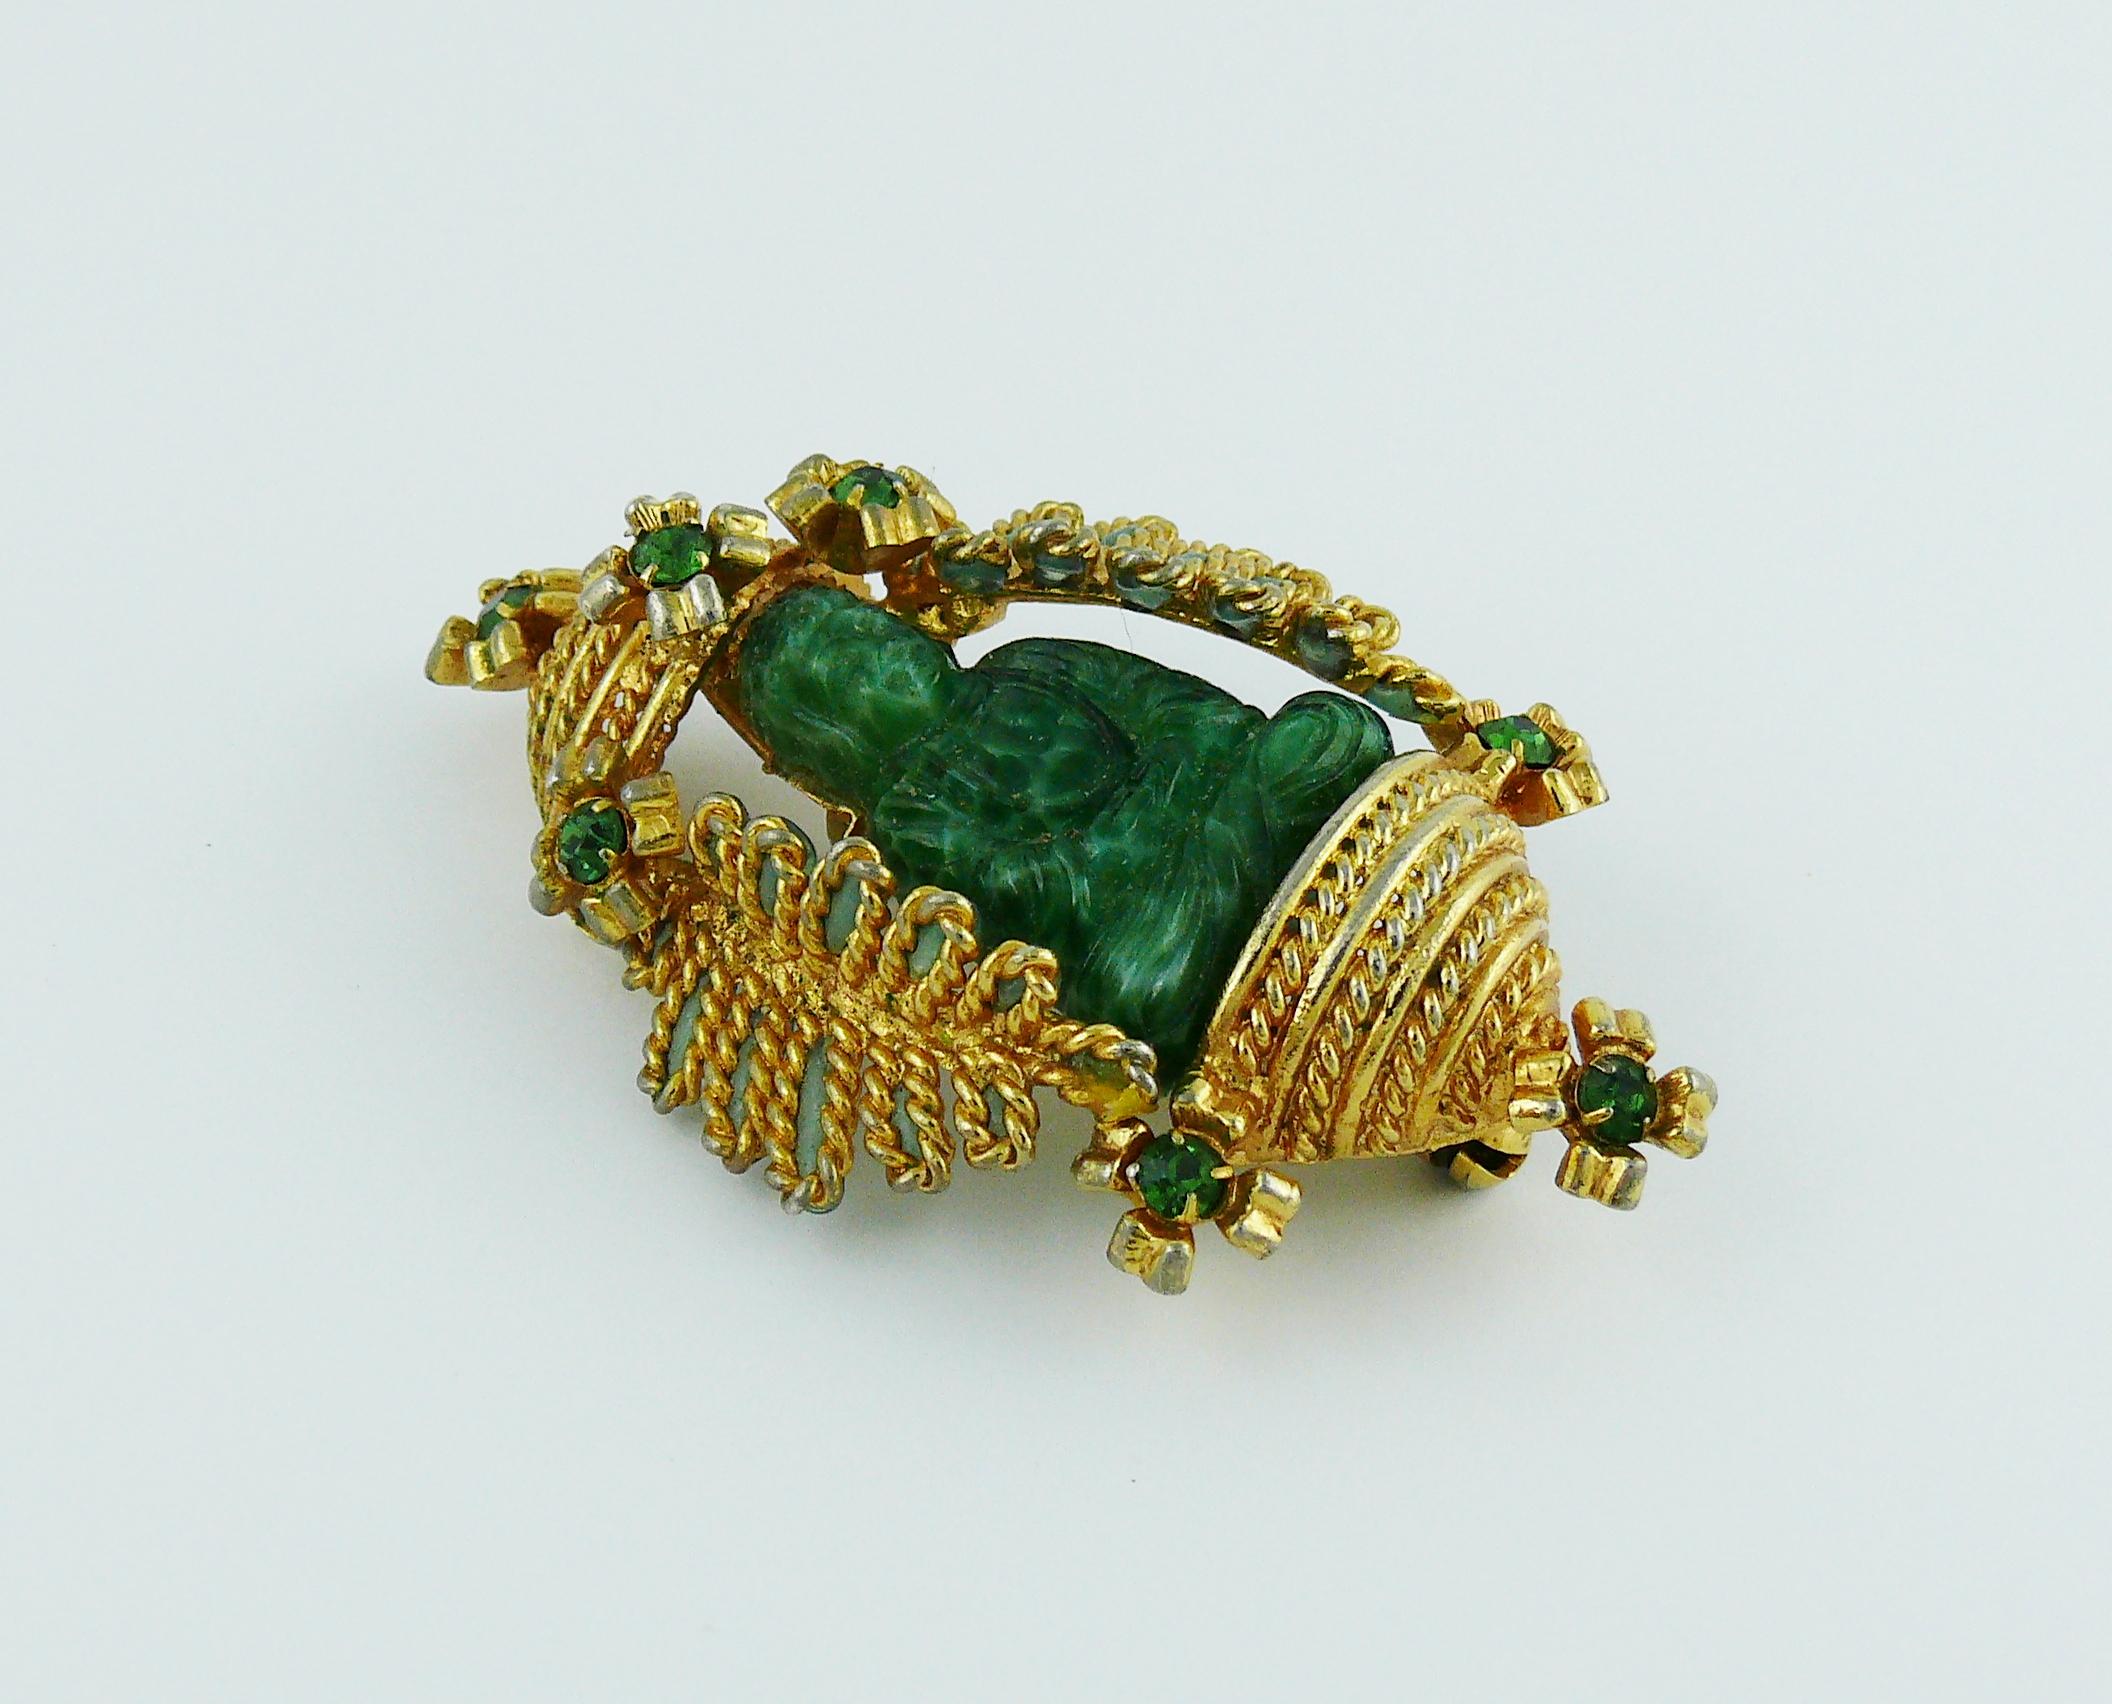 CHRISTIAN DIOR vintage rare 1967 brooch featuring a jade green resin buddha seating in a gold toned temple design setting with green crystal embellishement.

Marked 19 CHR. DIOR 67.
Made in Germany.

Indicative measurements : approx. 5.5 cm (2.17